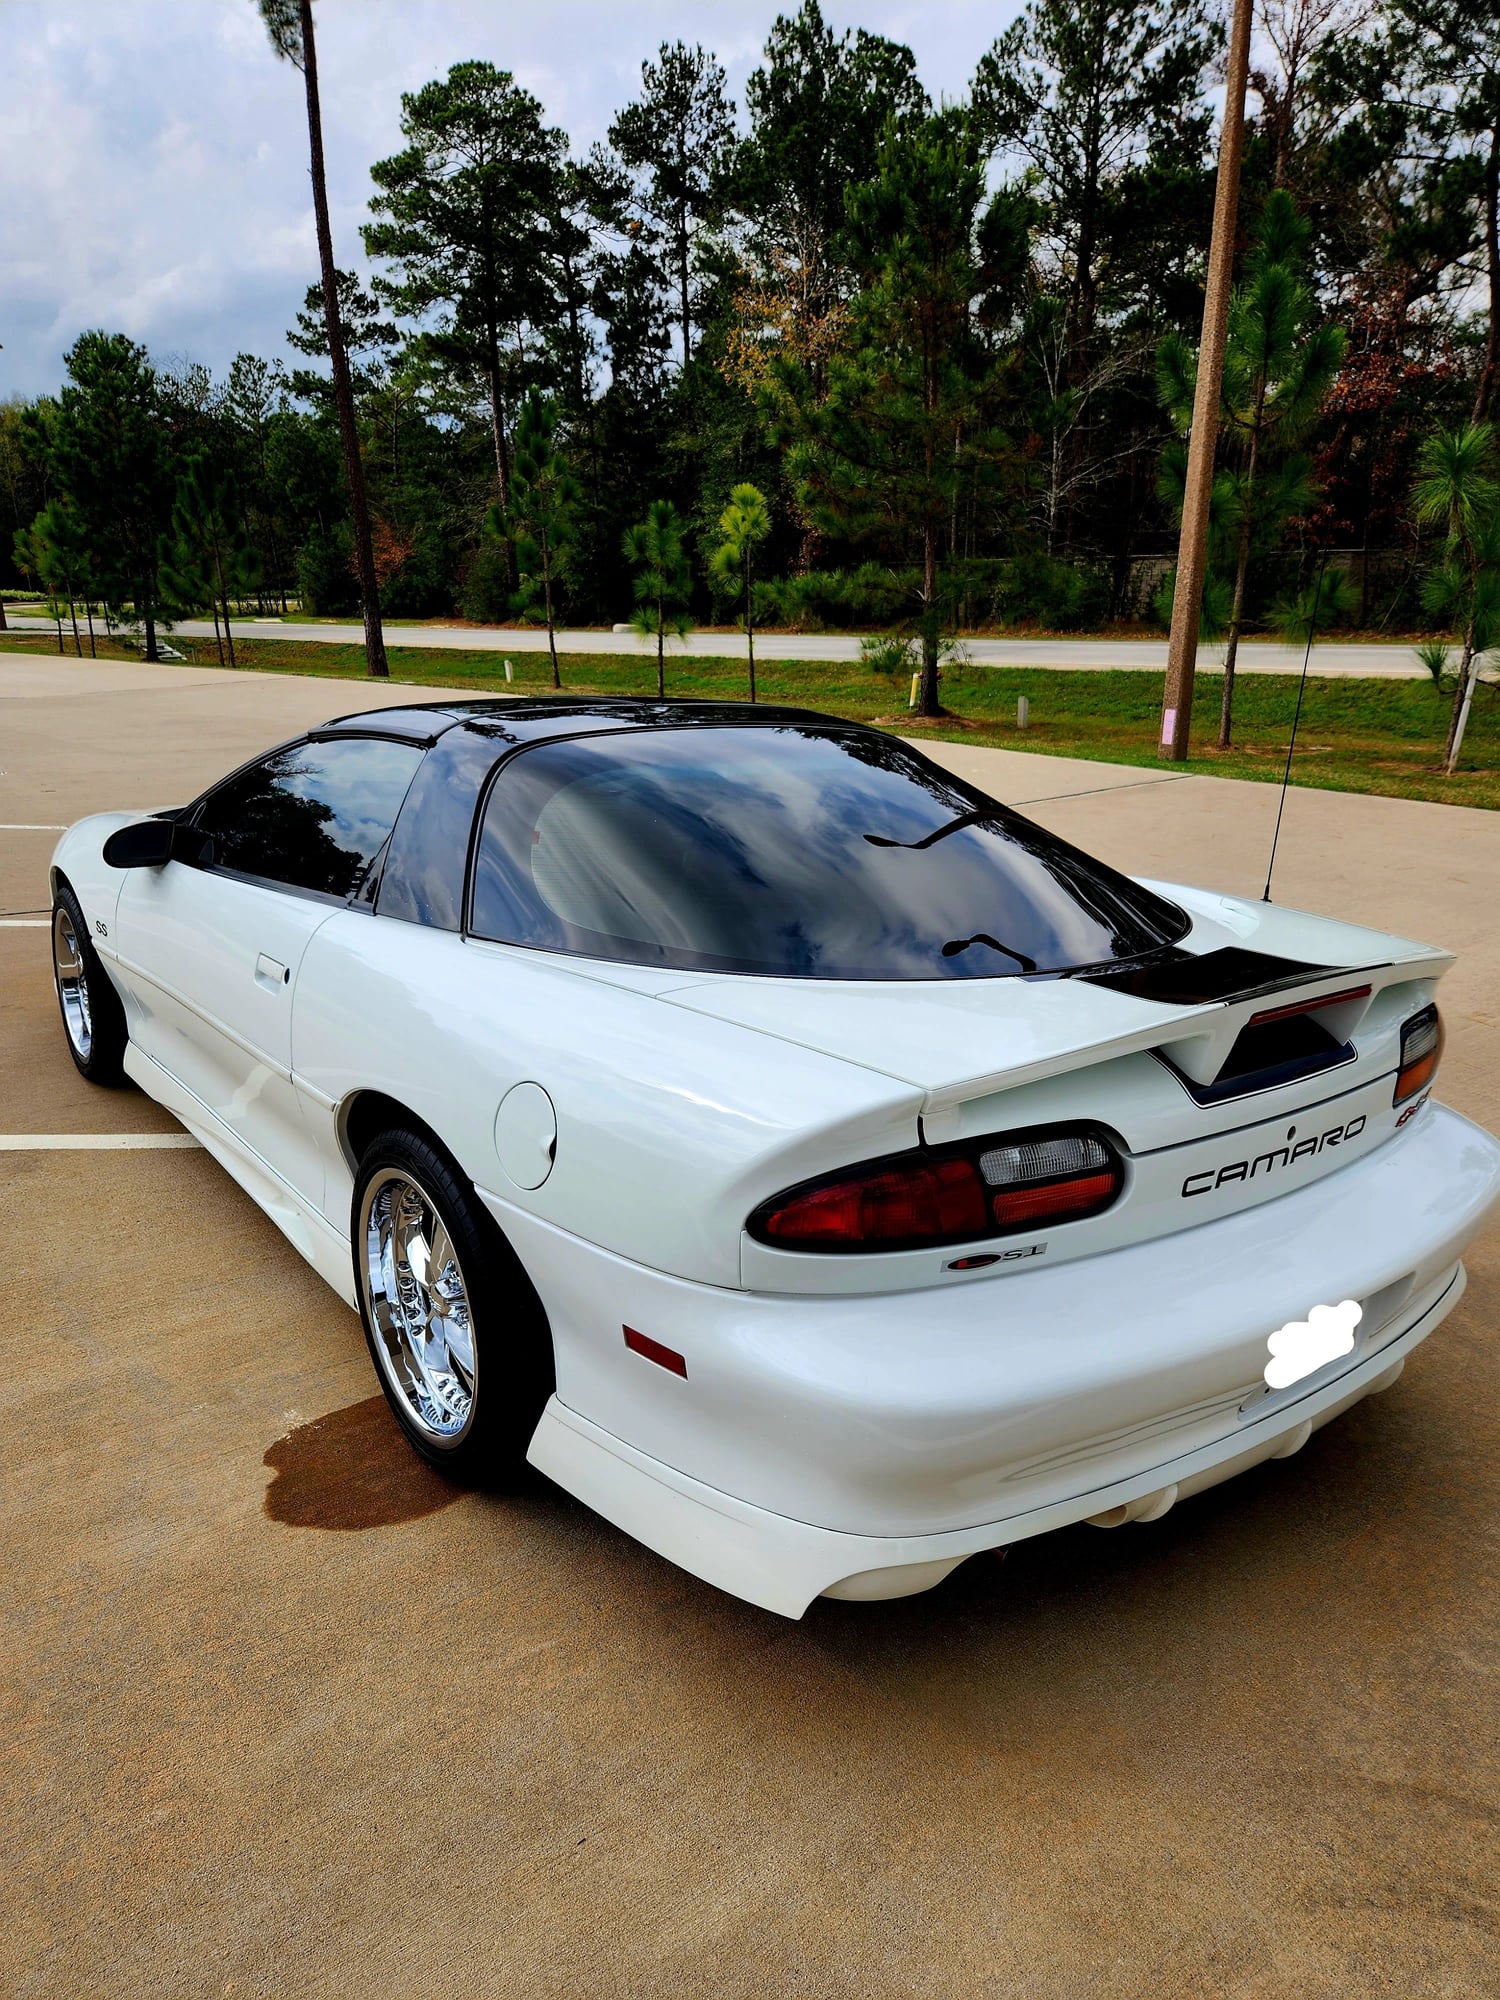 2002 Chevrolet Camaro - 2002 Camaro SS SLP - Used - VIN 2G1FP22G122100677 - 47,800 Miles - 8 cyl - 2WD - Automatic - Coupe - White - Montgomery, TX 77316, United States